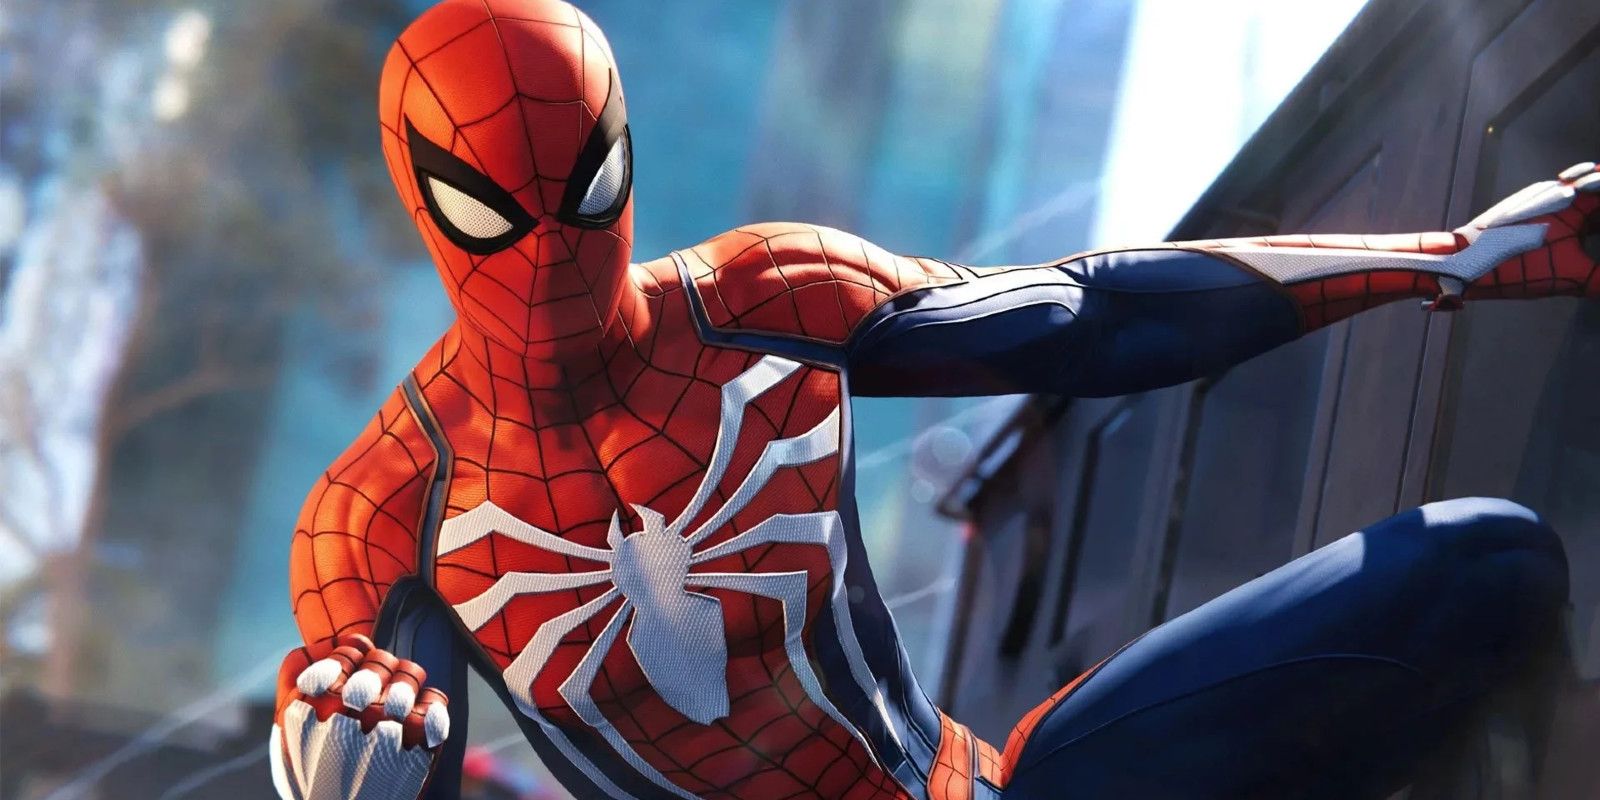 Spider-Man poses against a wall in Marvel's Spider-Man